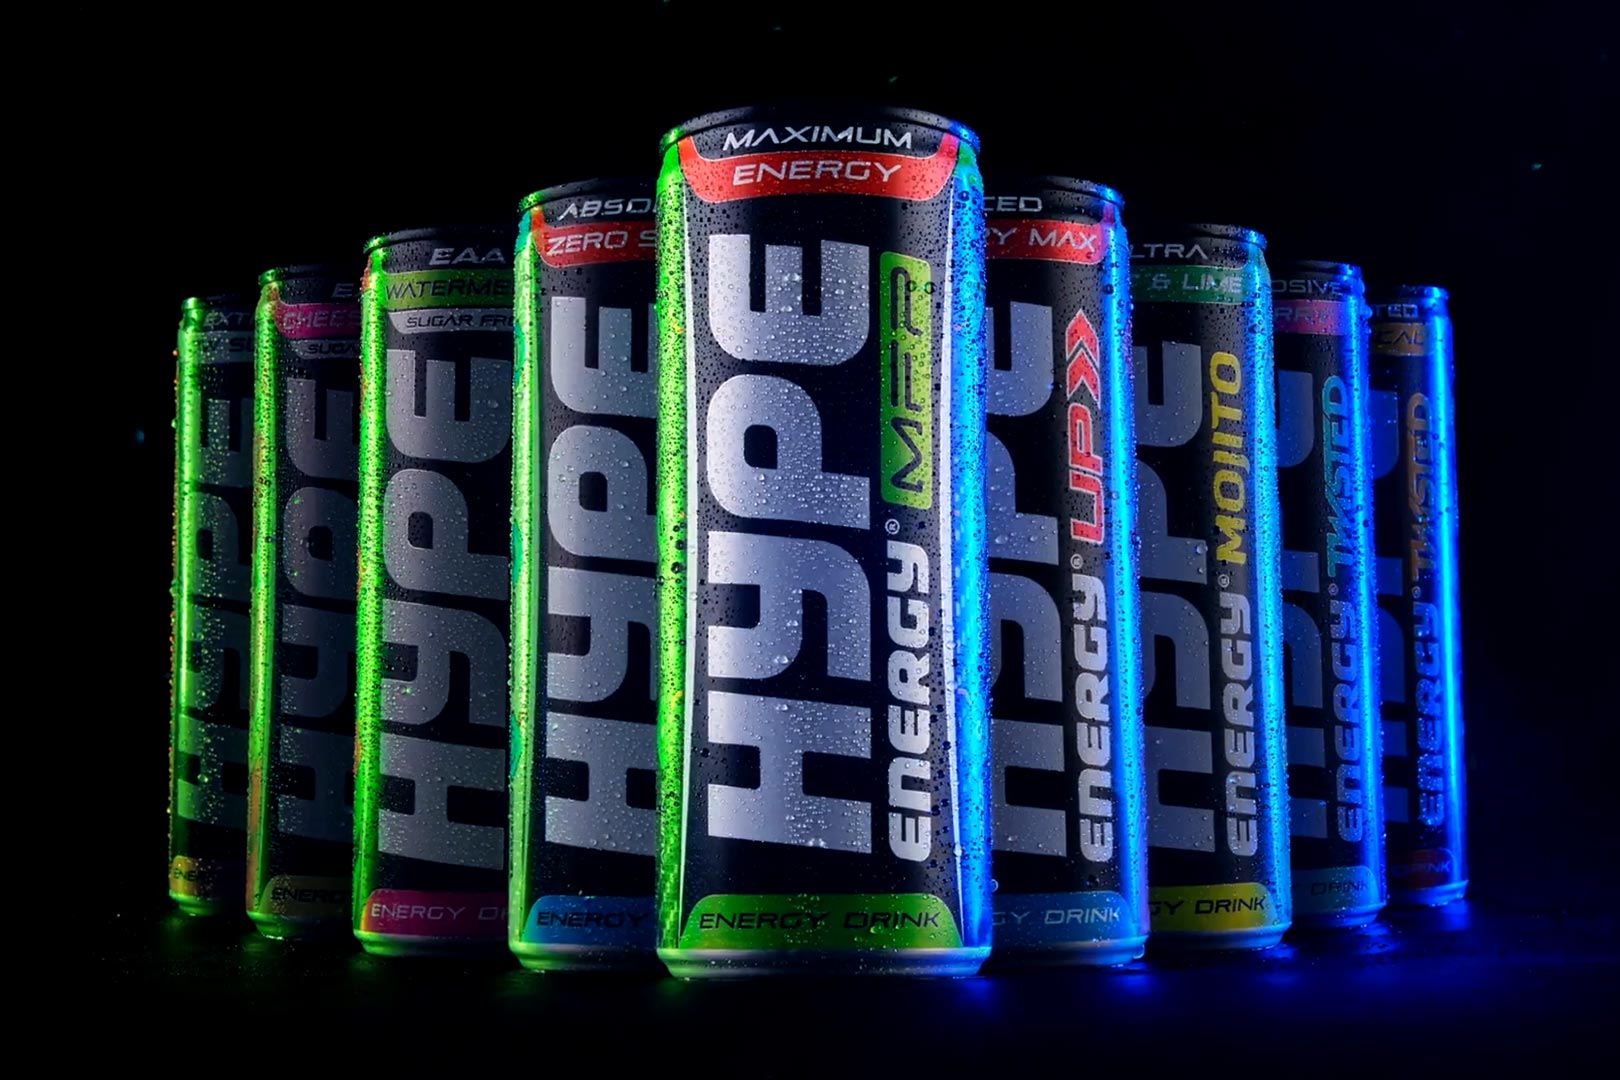 International energy drink brand Hype is getting into supplements in the New Year